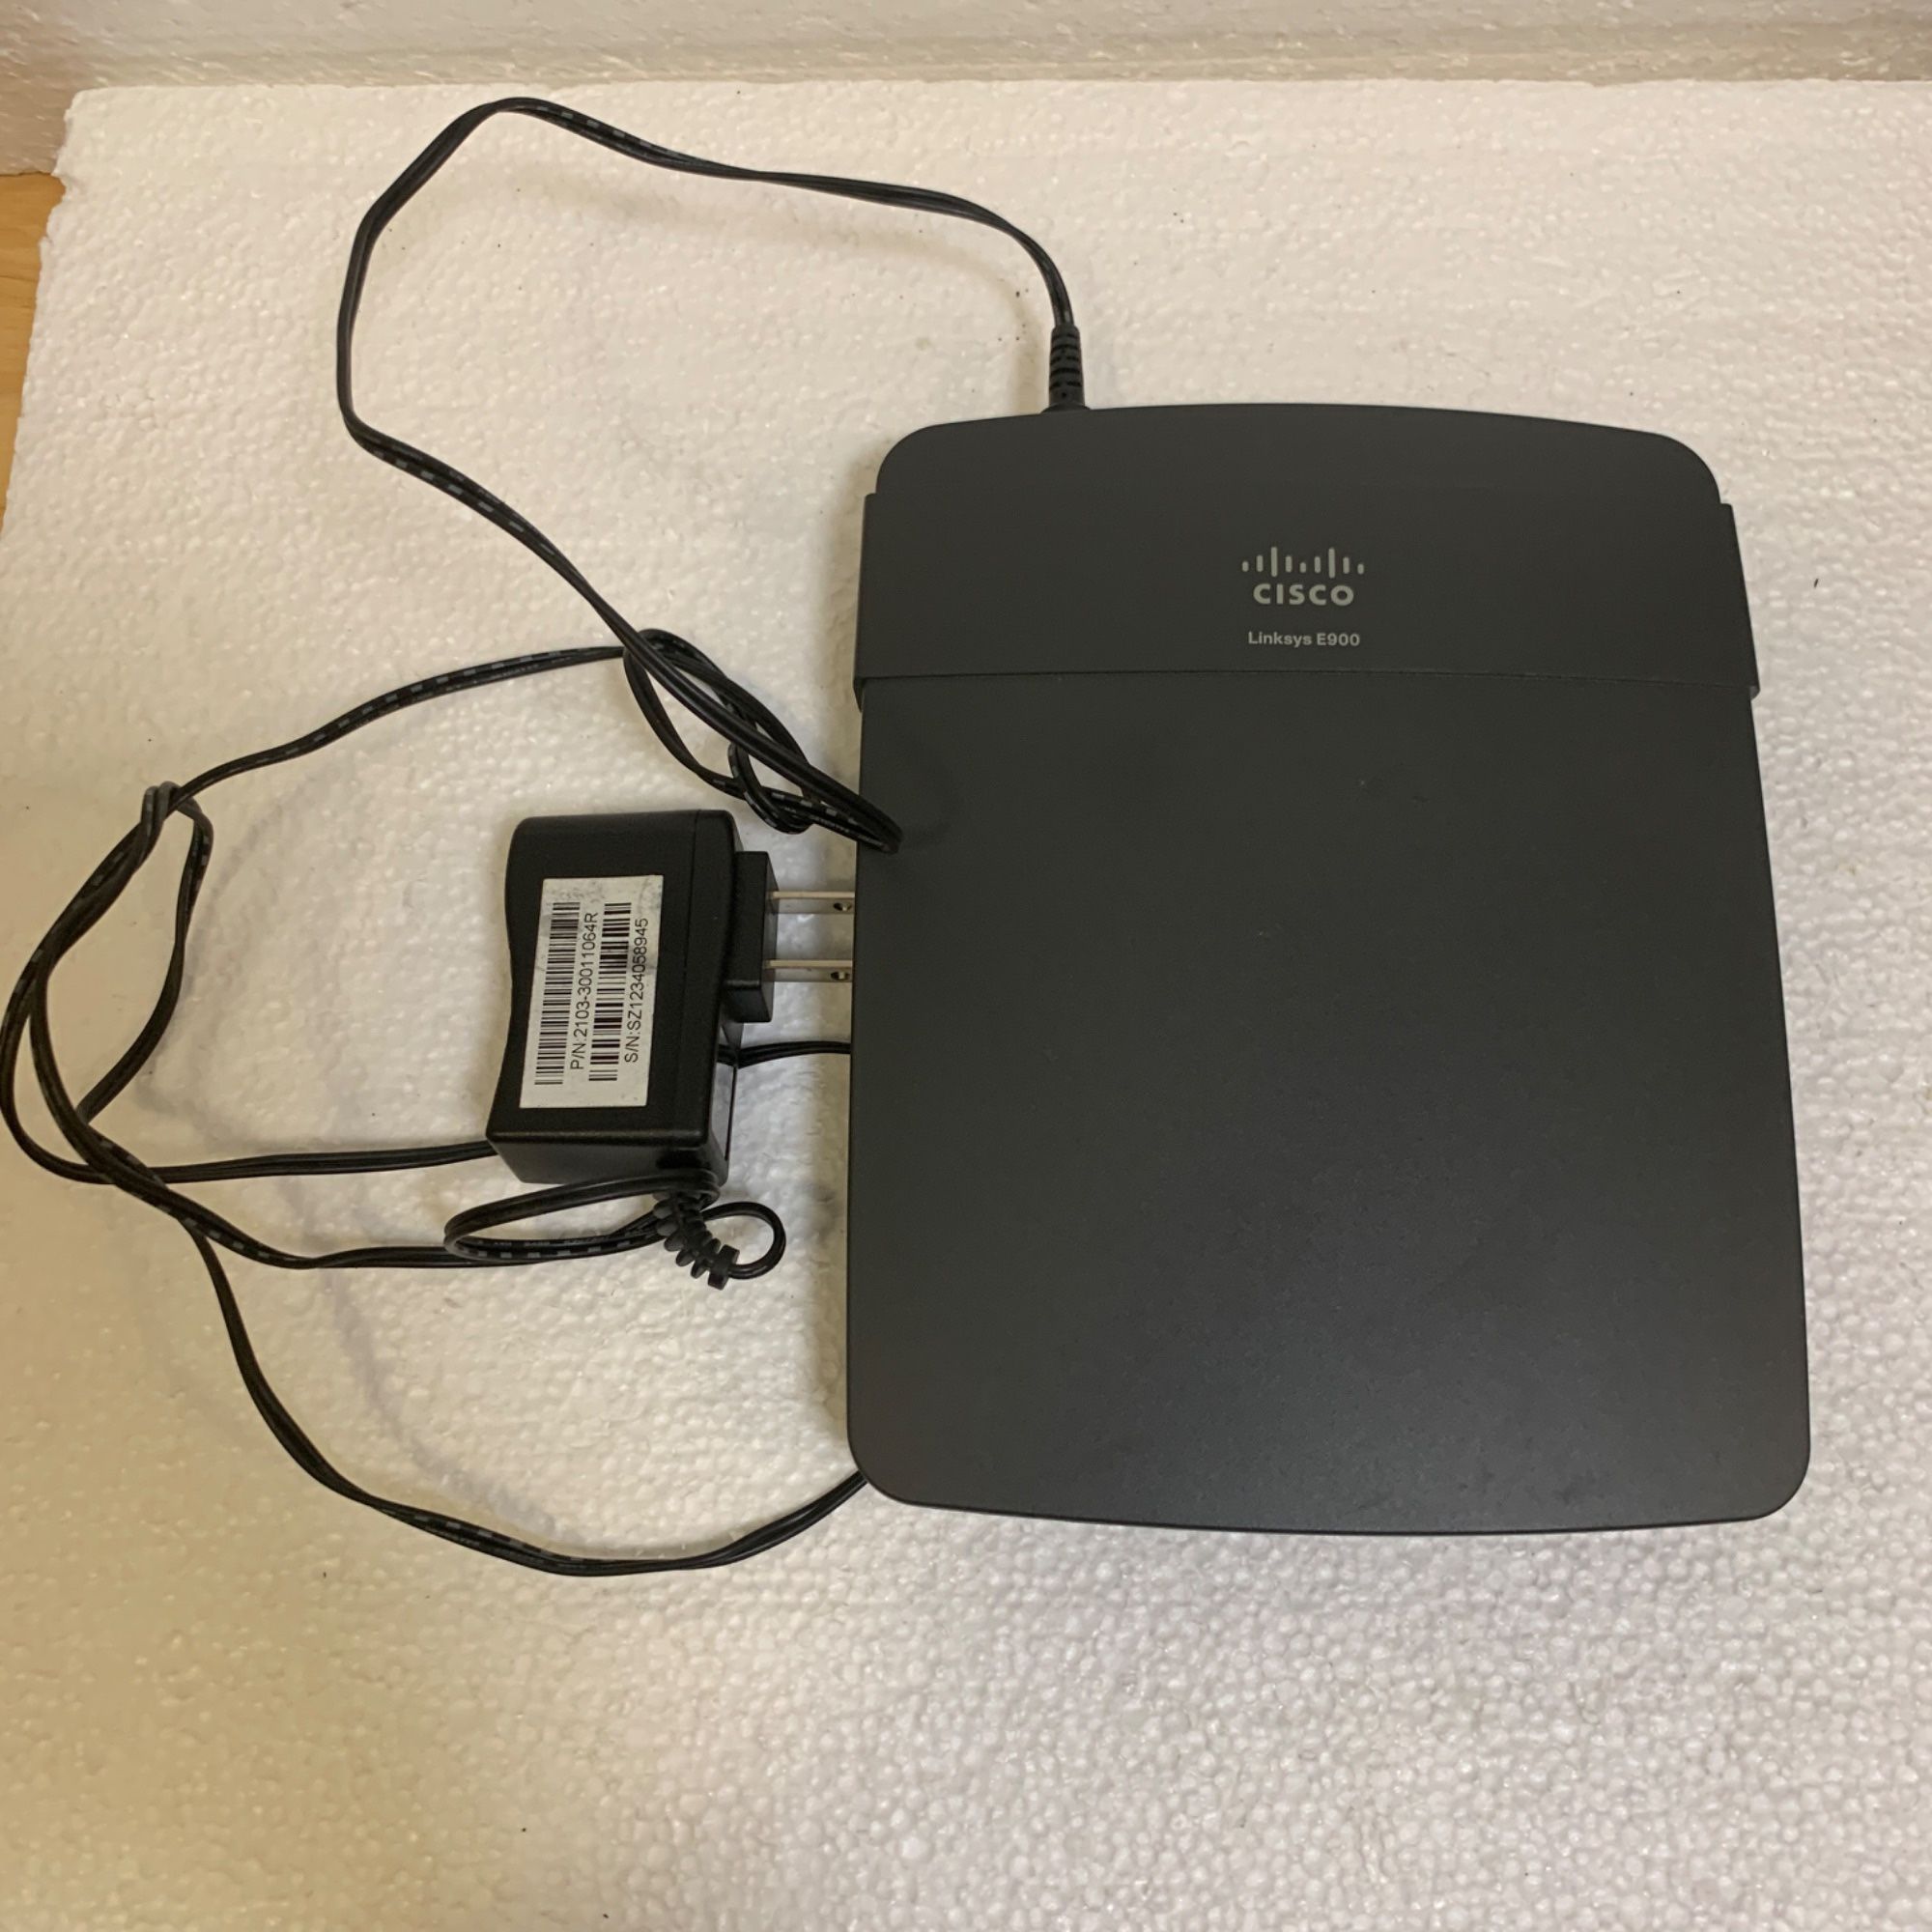 CISCO Linksys E900 300 Mbps 4-Port 10/100 Wireless N Wi-Fi Router